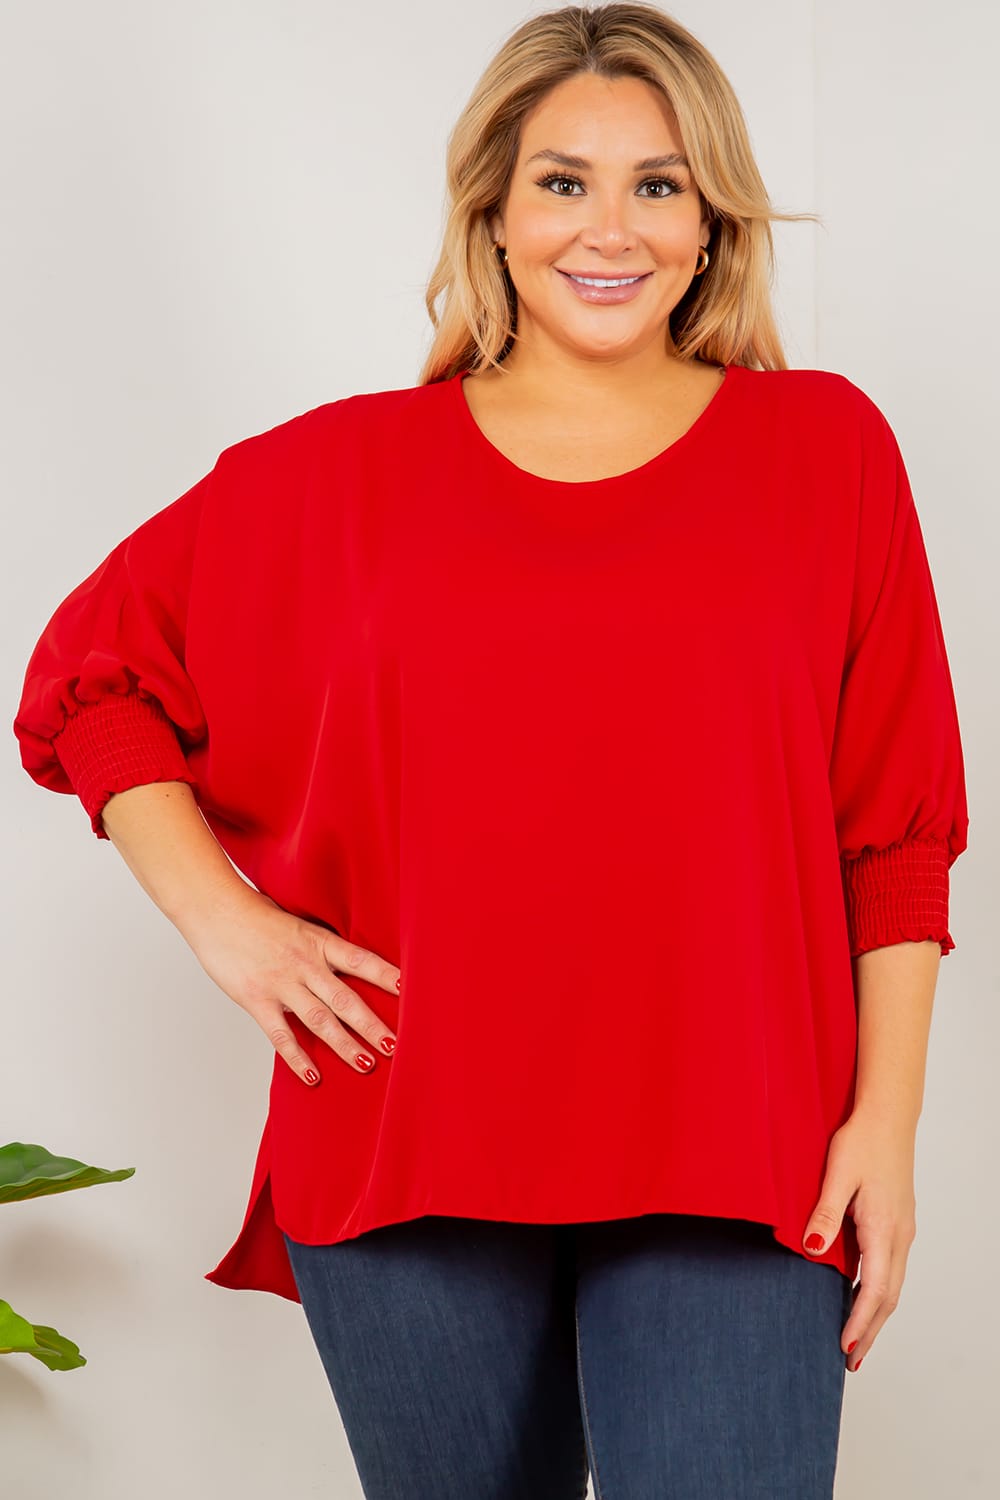 Top With Smocking Sleeves in Red & Black